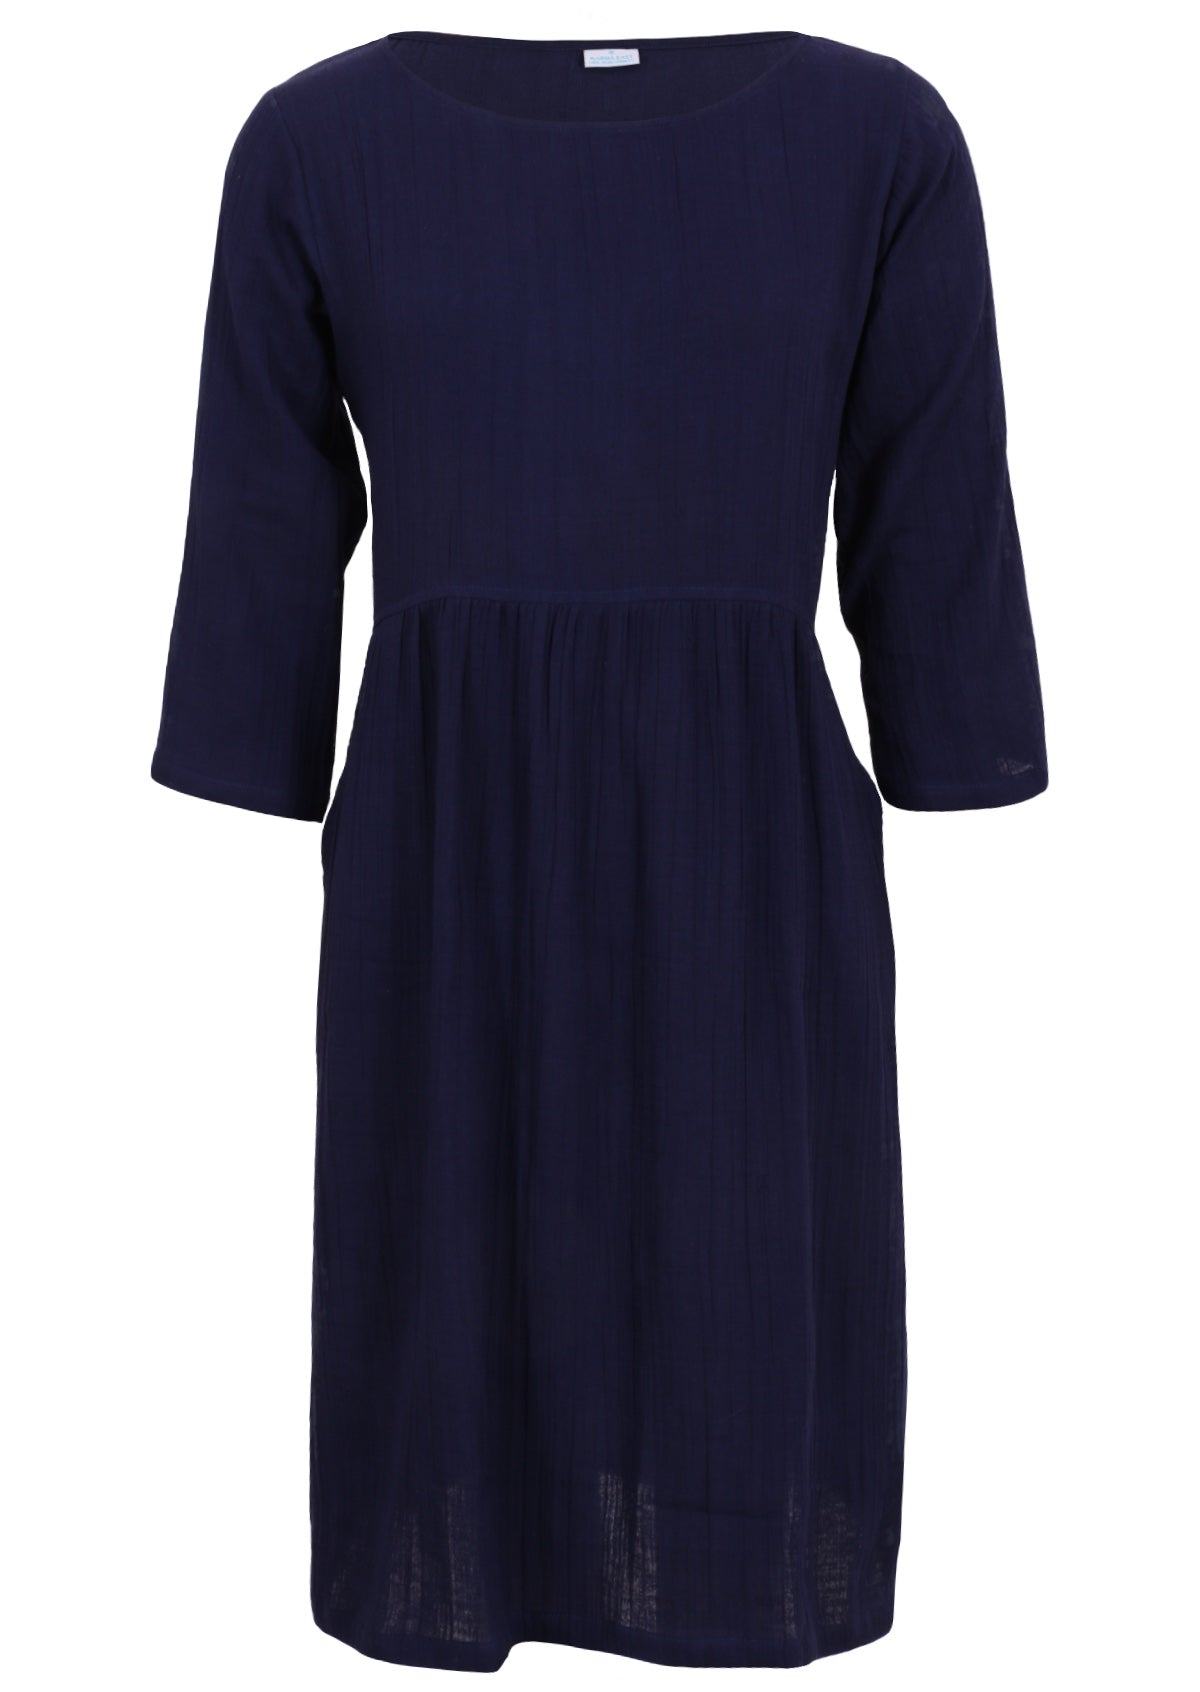 Deep blue cotton gauze dress with round neckline and 3/4 sleeves